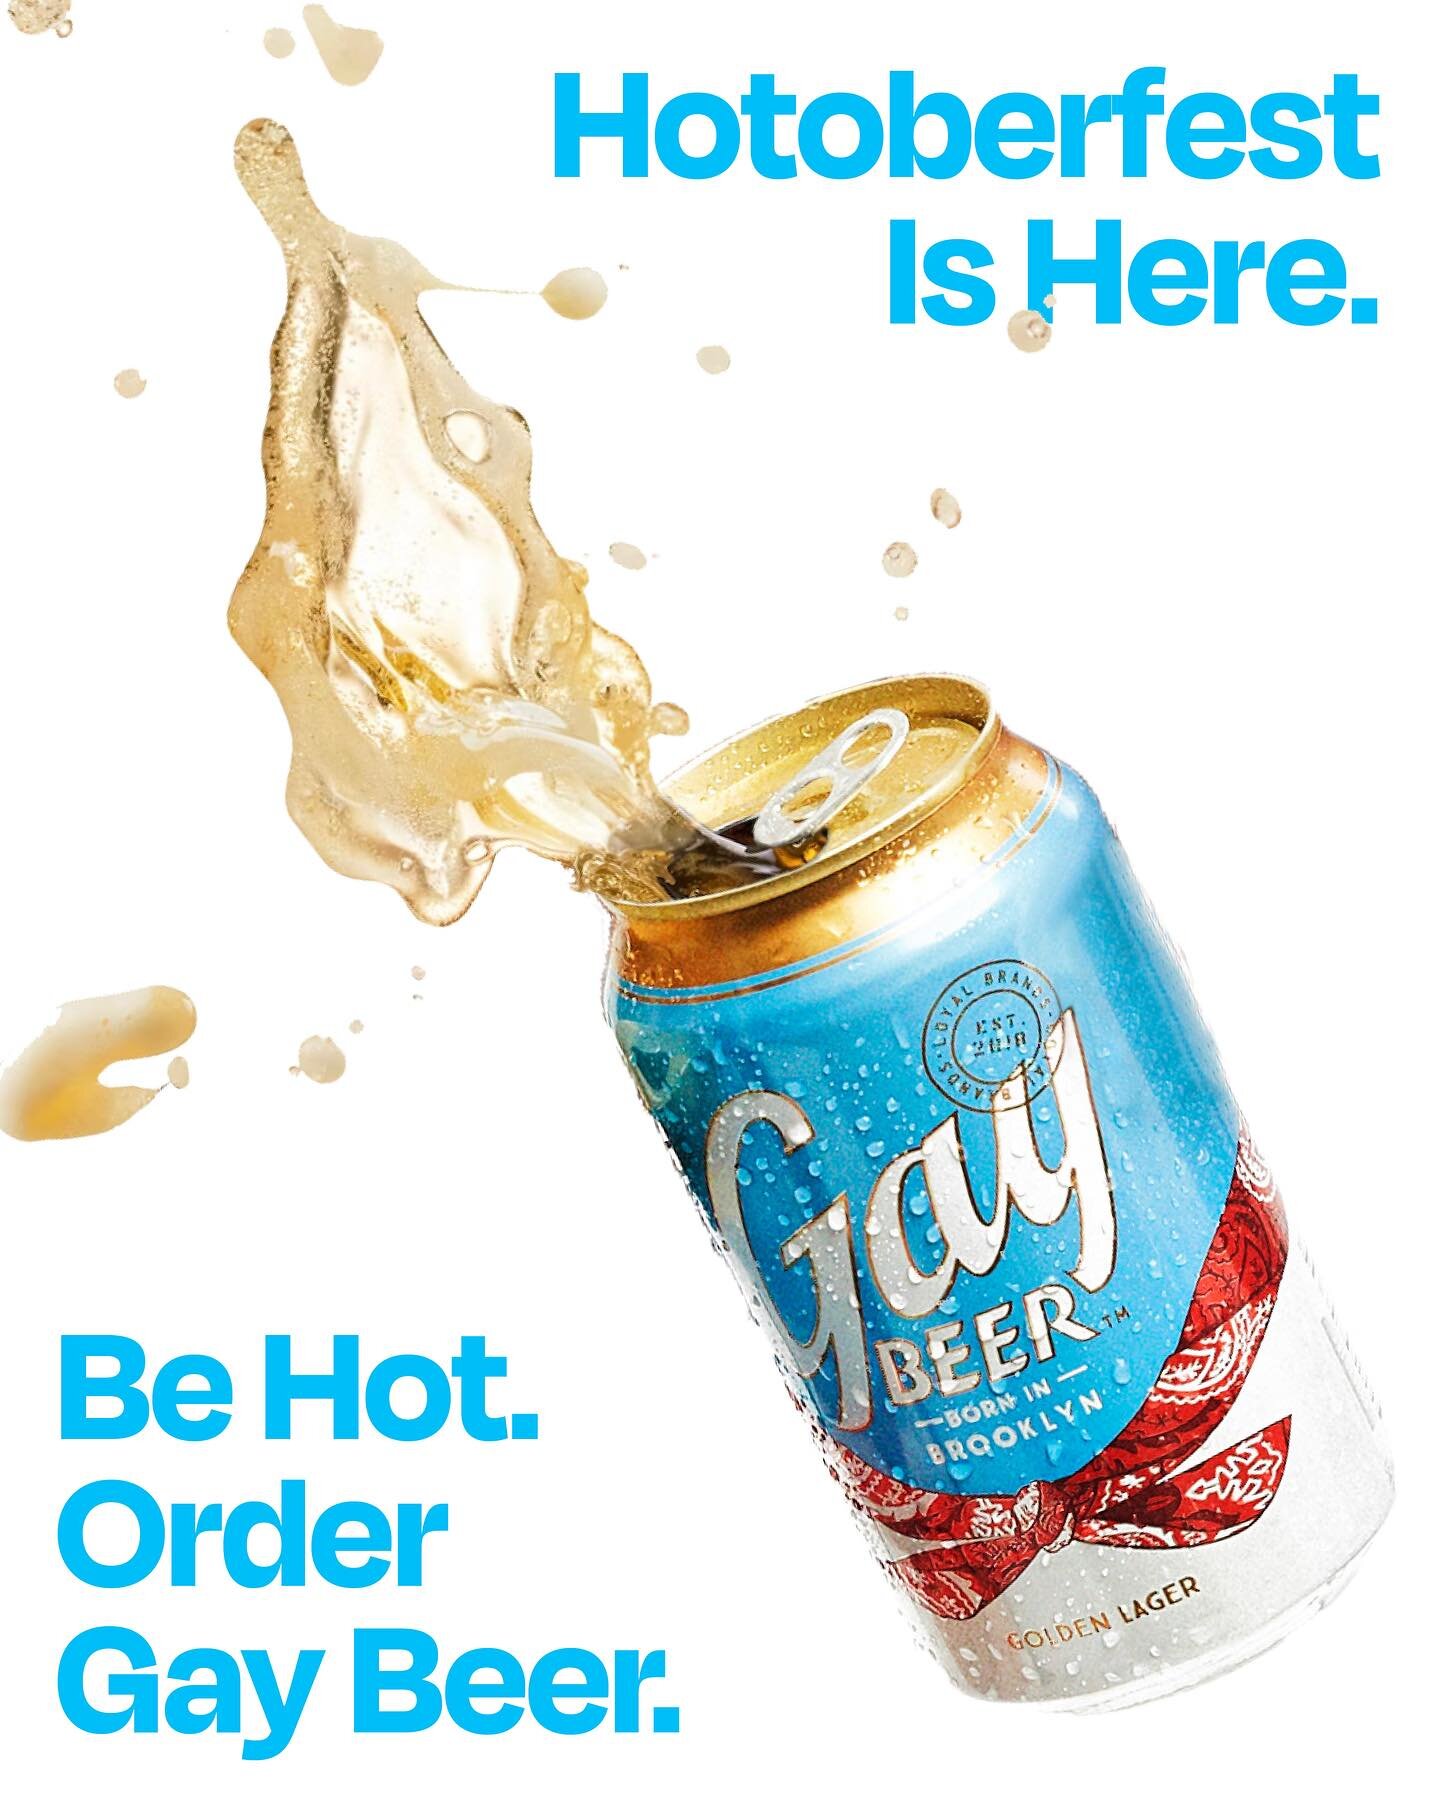 We know you&rsquo;re hot, so flex it! Click the link in our bio to order Gay Beer and join in on Hotoberfest to kick off beer drinking season! // #gaybeer #oktoberfest #hot #drink #gay #beer #order #lgbtq #party #october